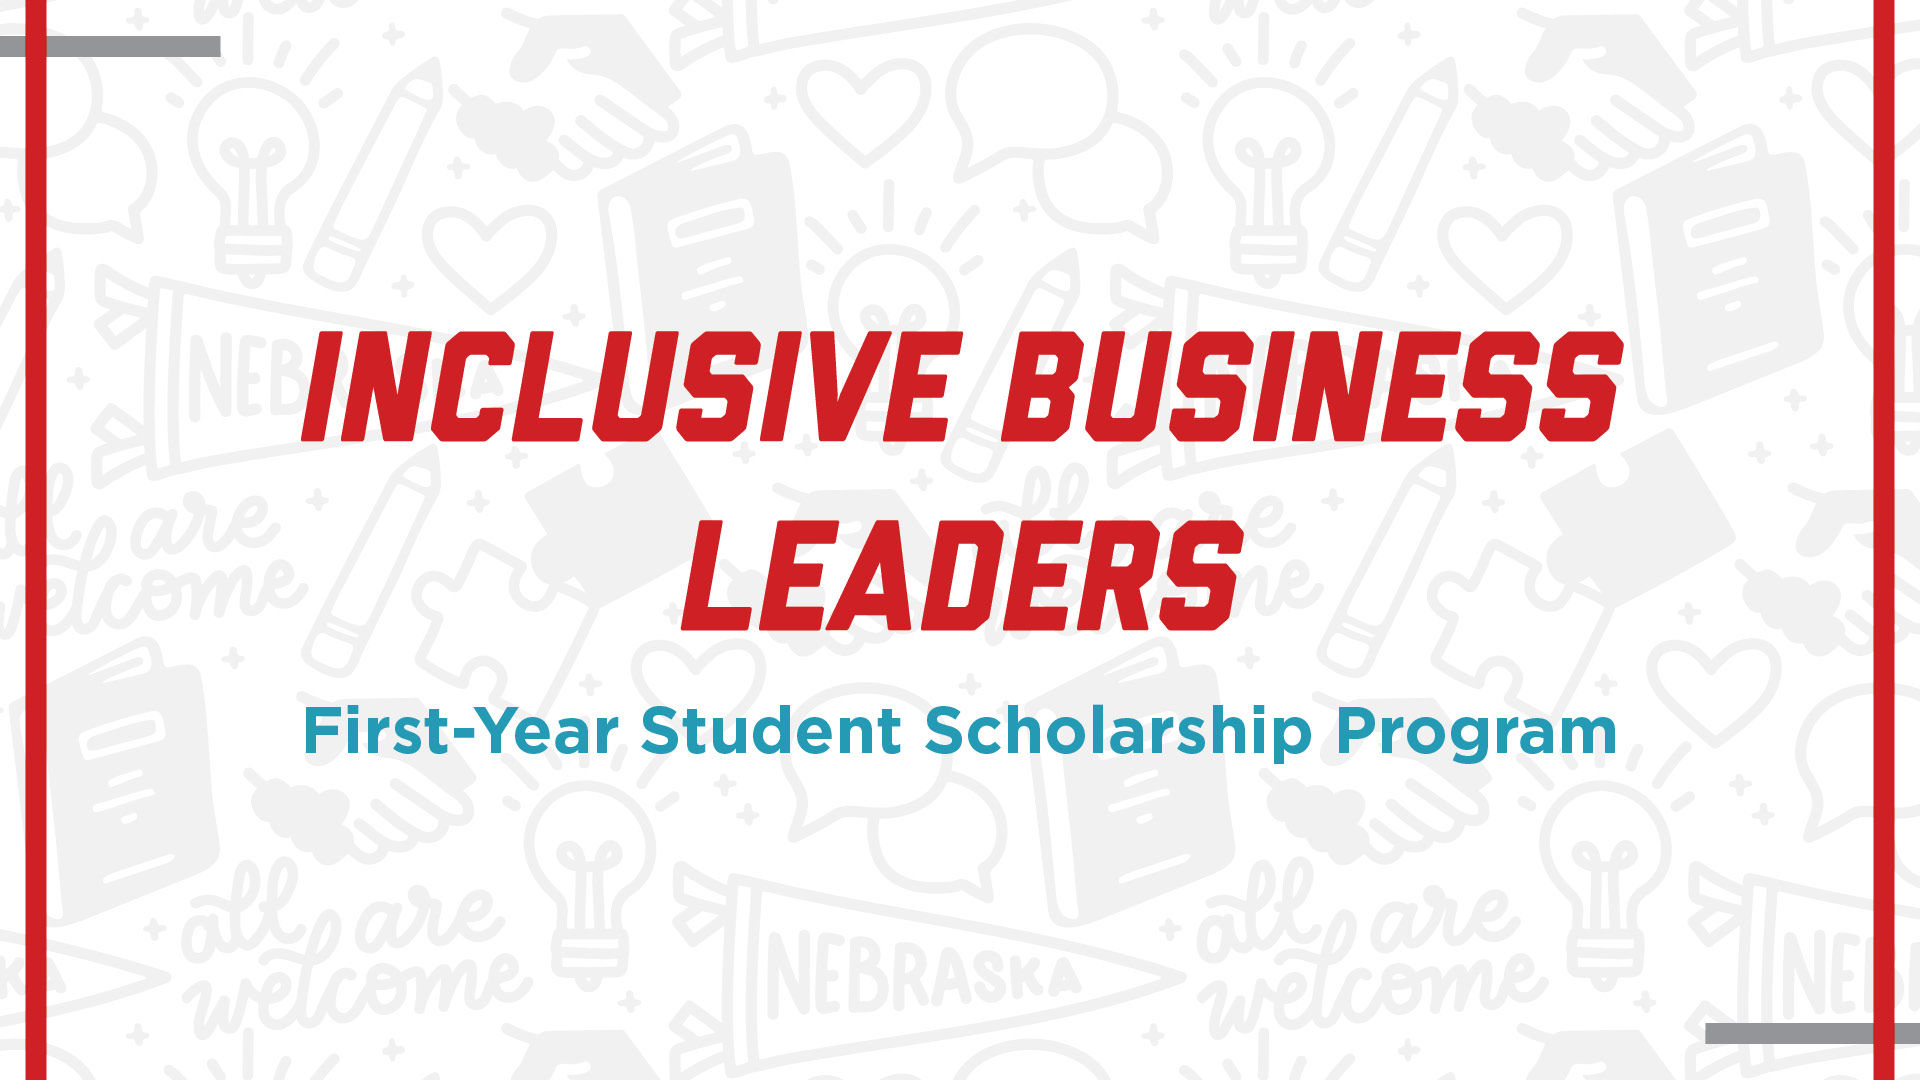 Incoming students with interest in making business more inclusive for all are invited to apply for the new Inclusive Business Leaders program by March 1. 